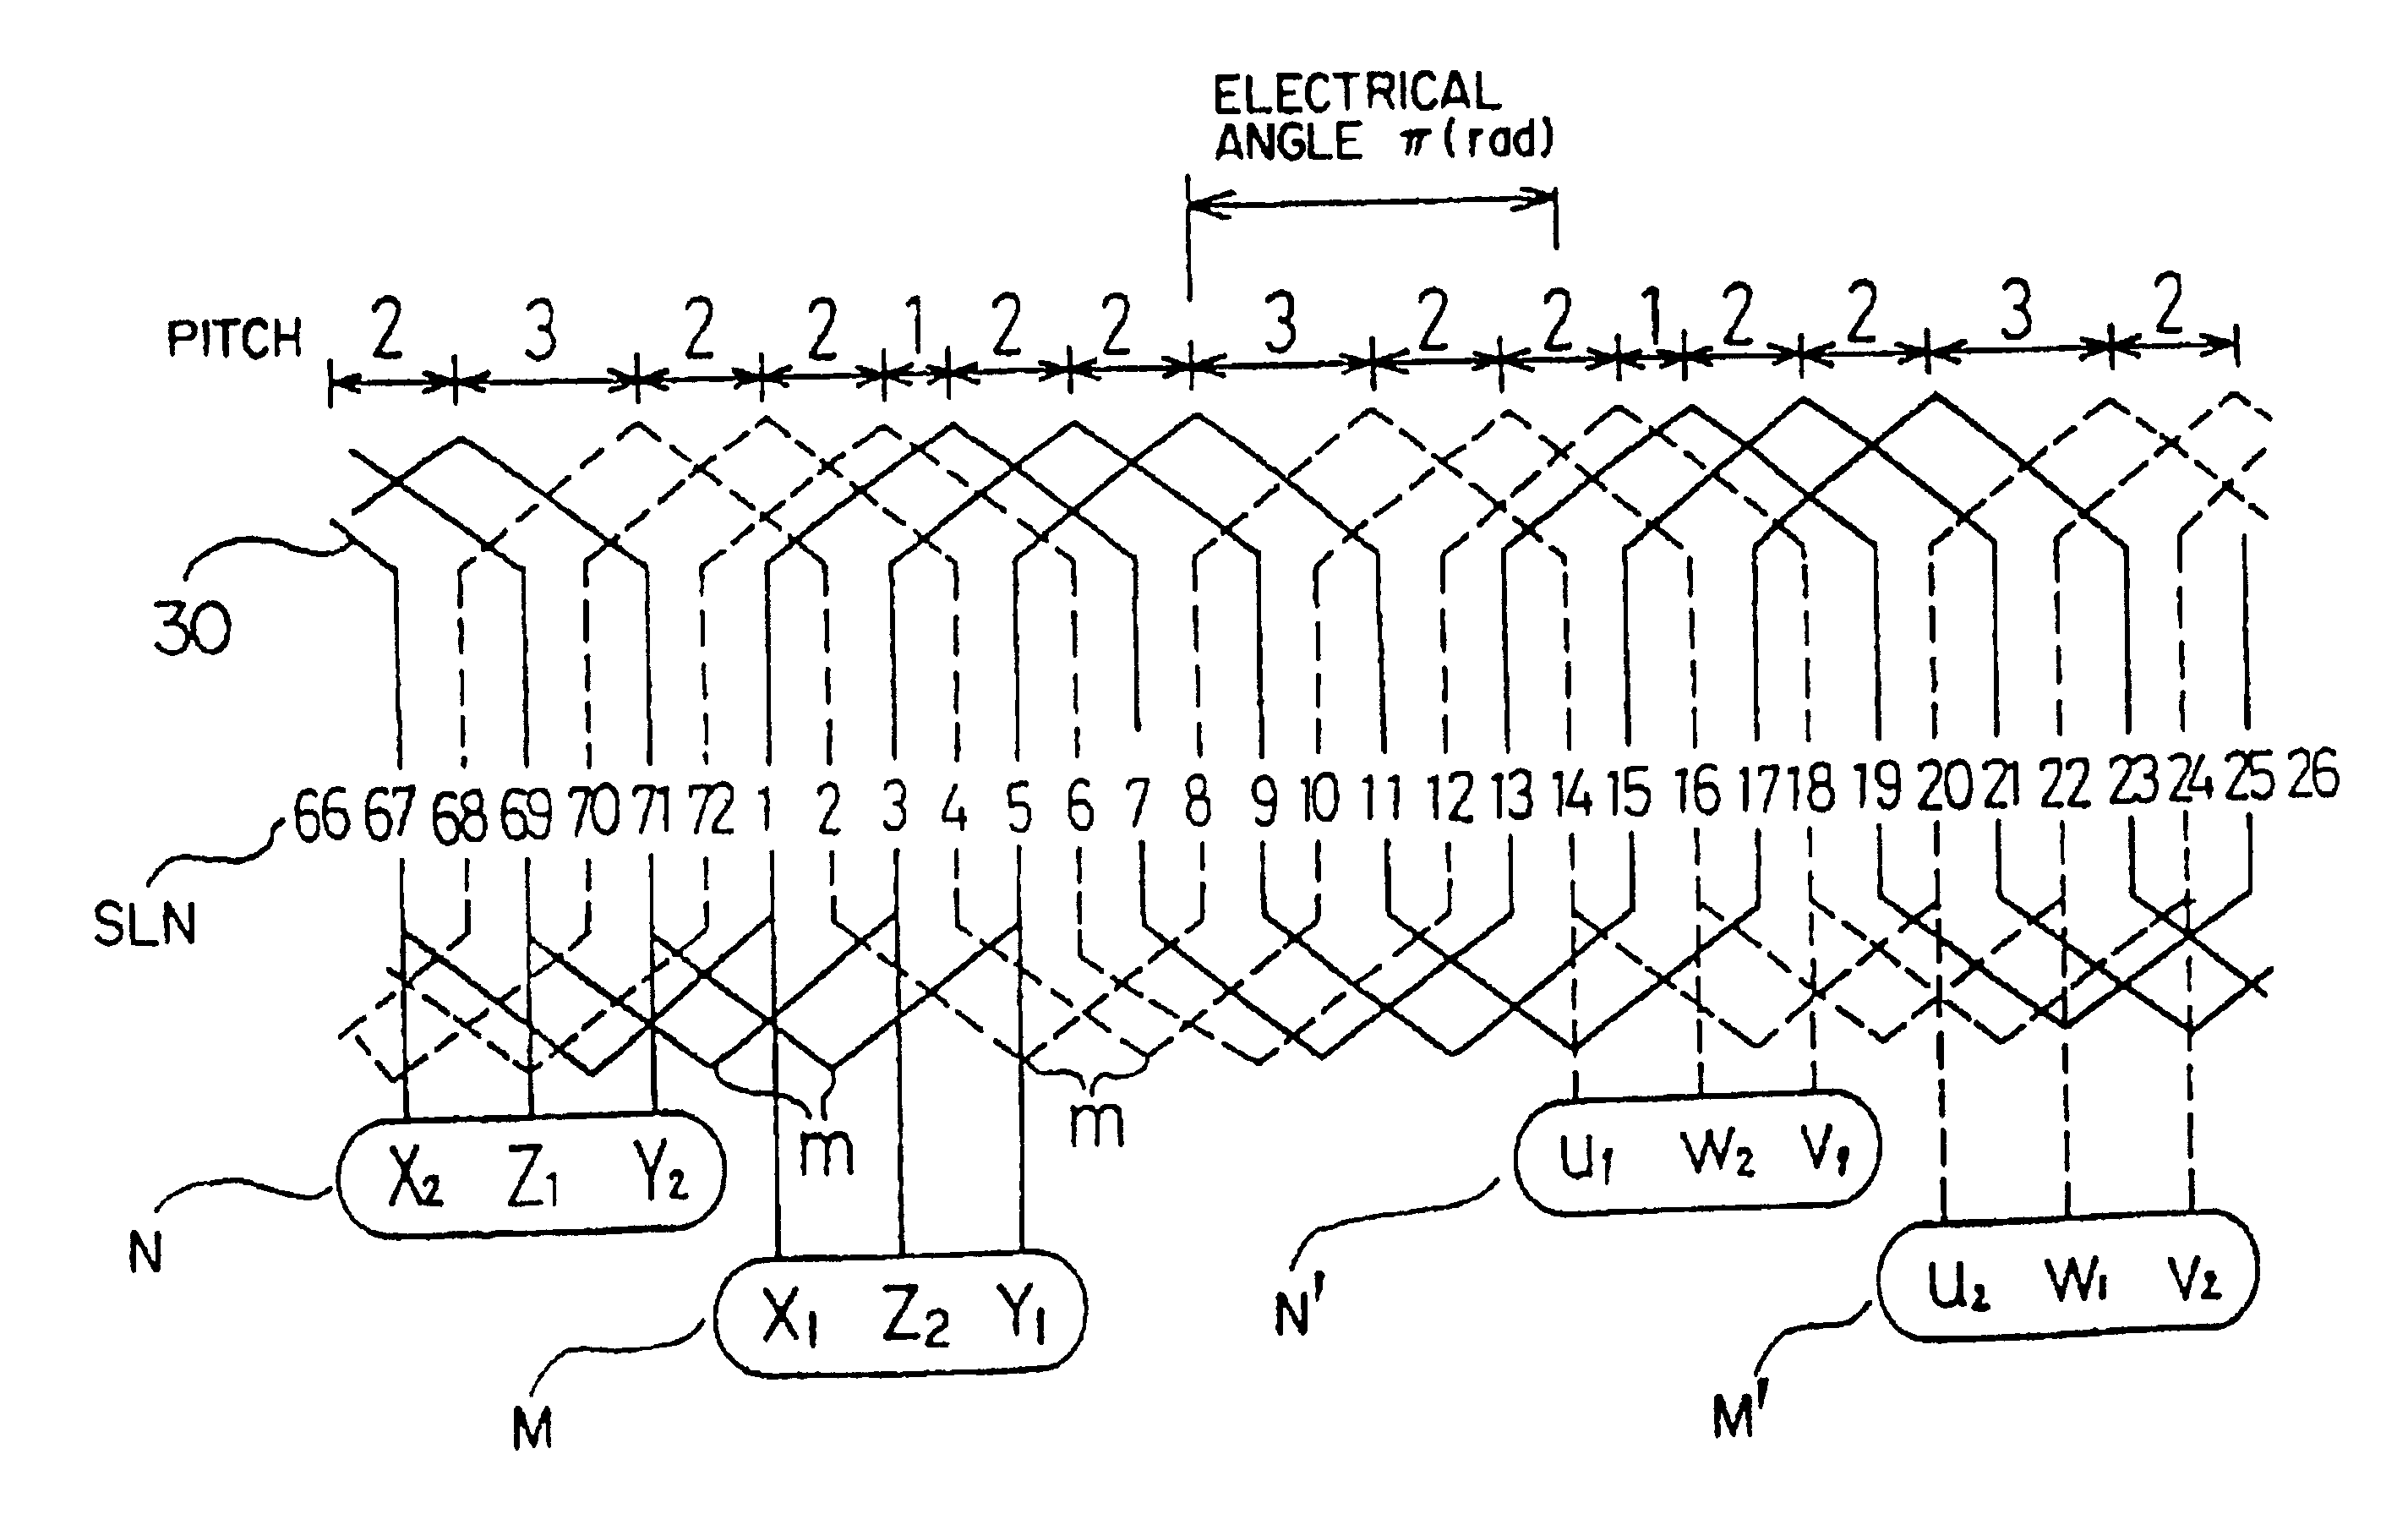 Alternating current generator having a plurality of independent three-phase windings